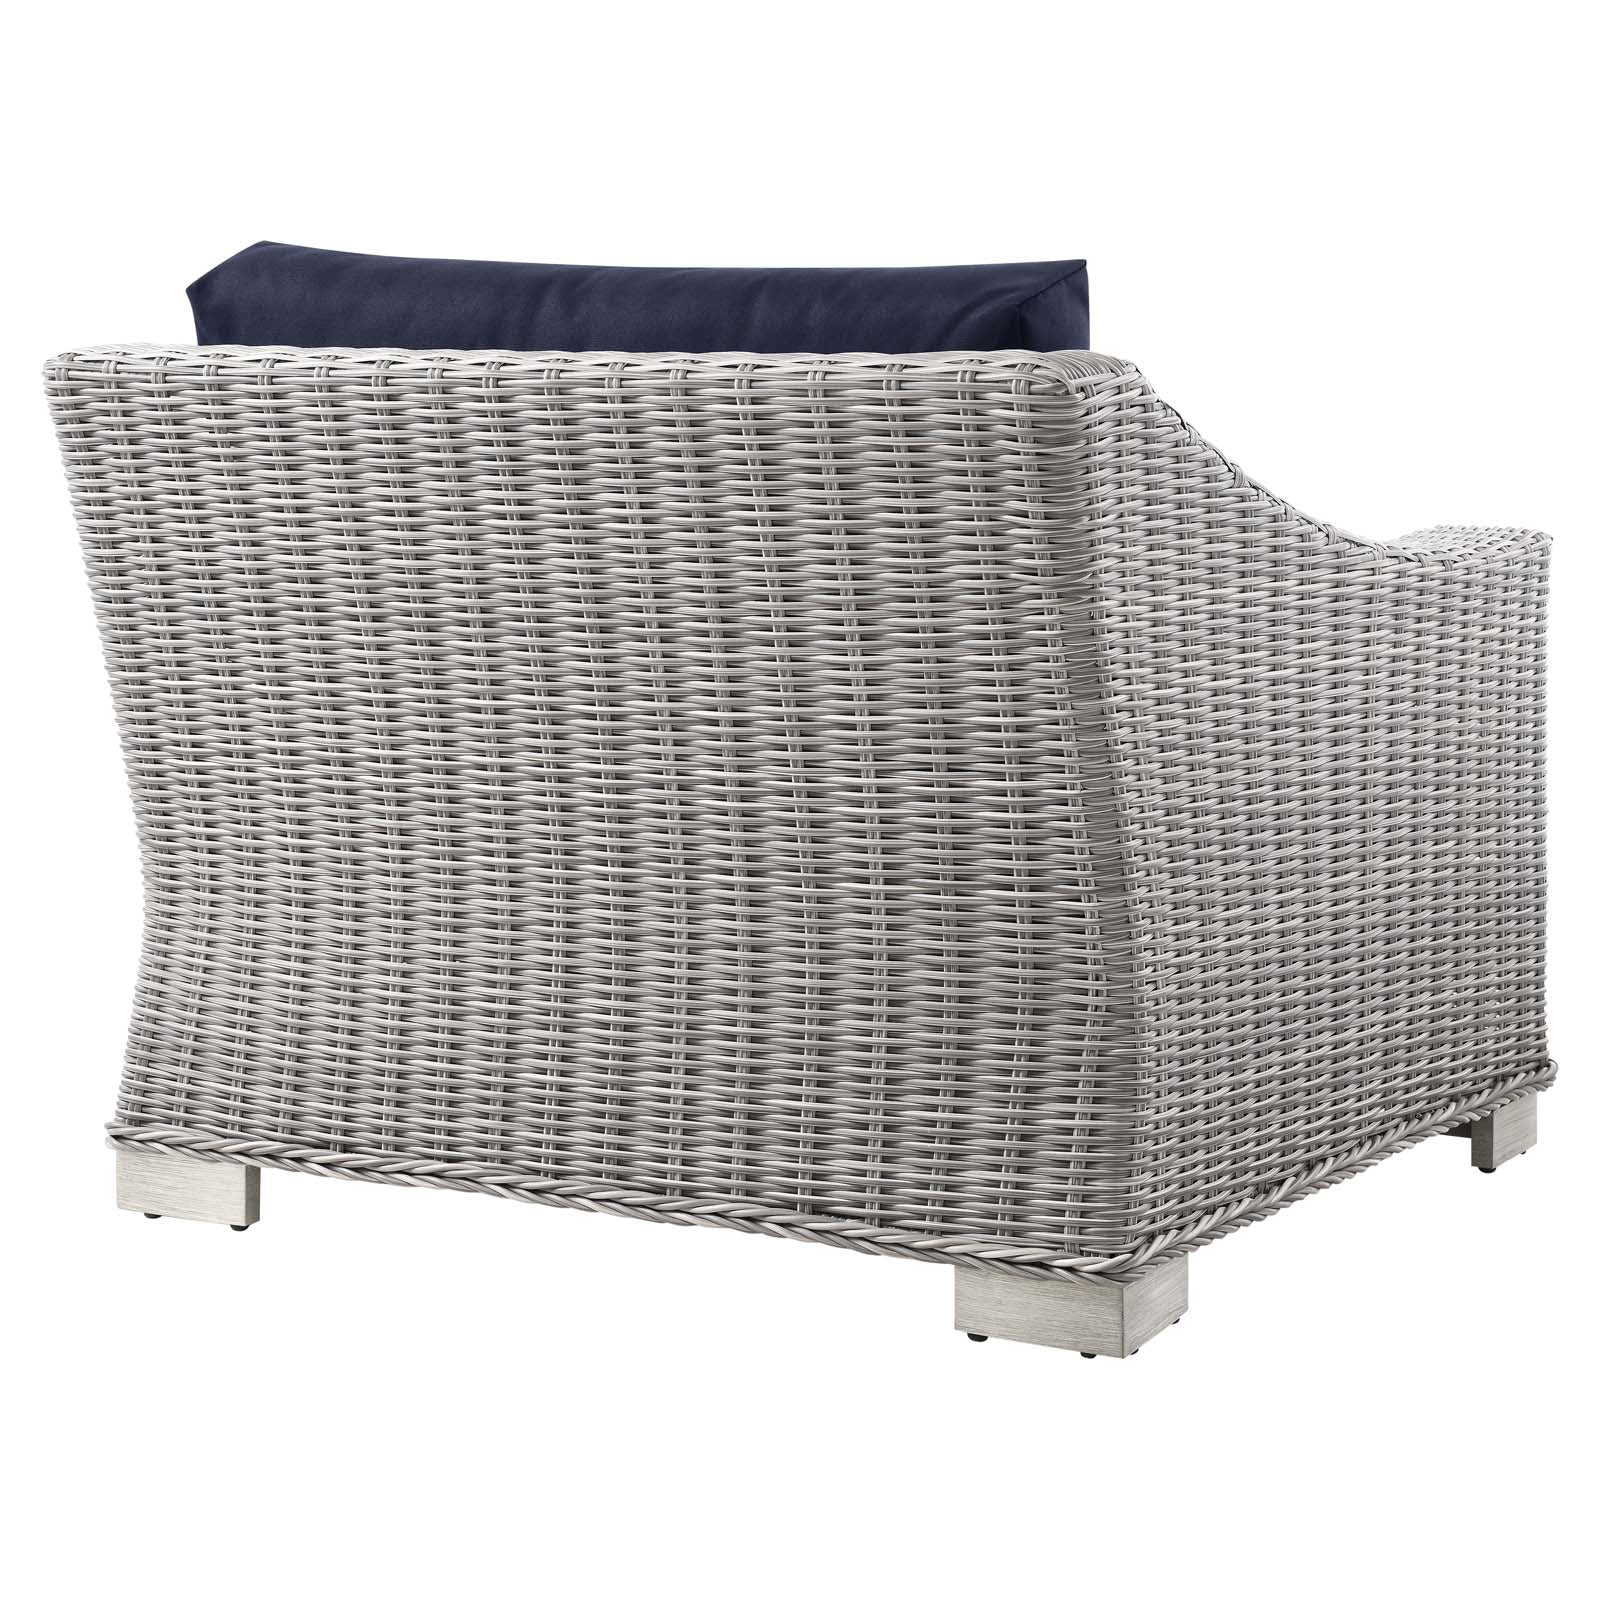 Modway Outdoor Chairs - Conway Outdoor Patio Wicker Rattan Left-Arm Chair Light Gray Navy